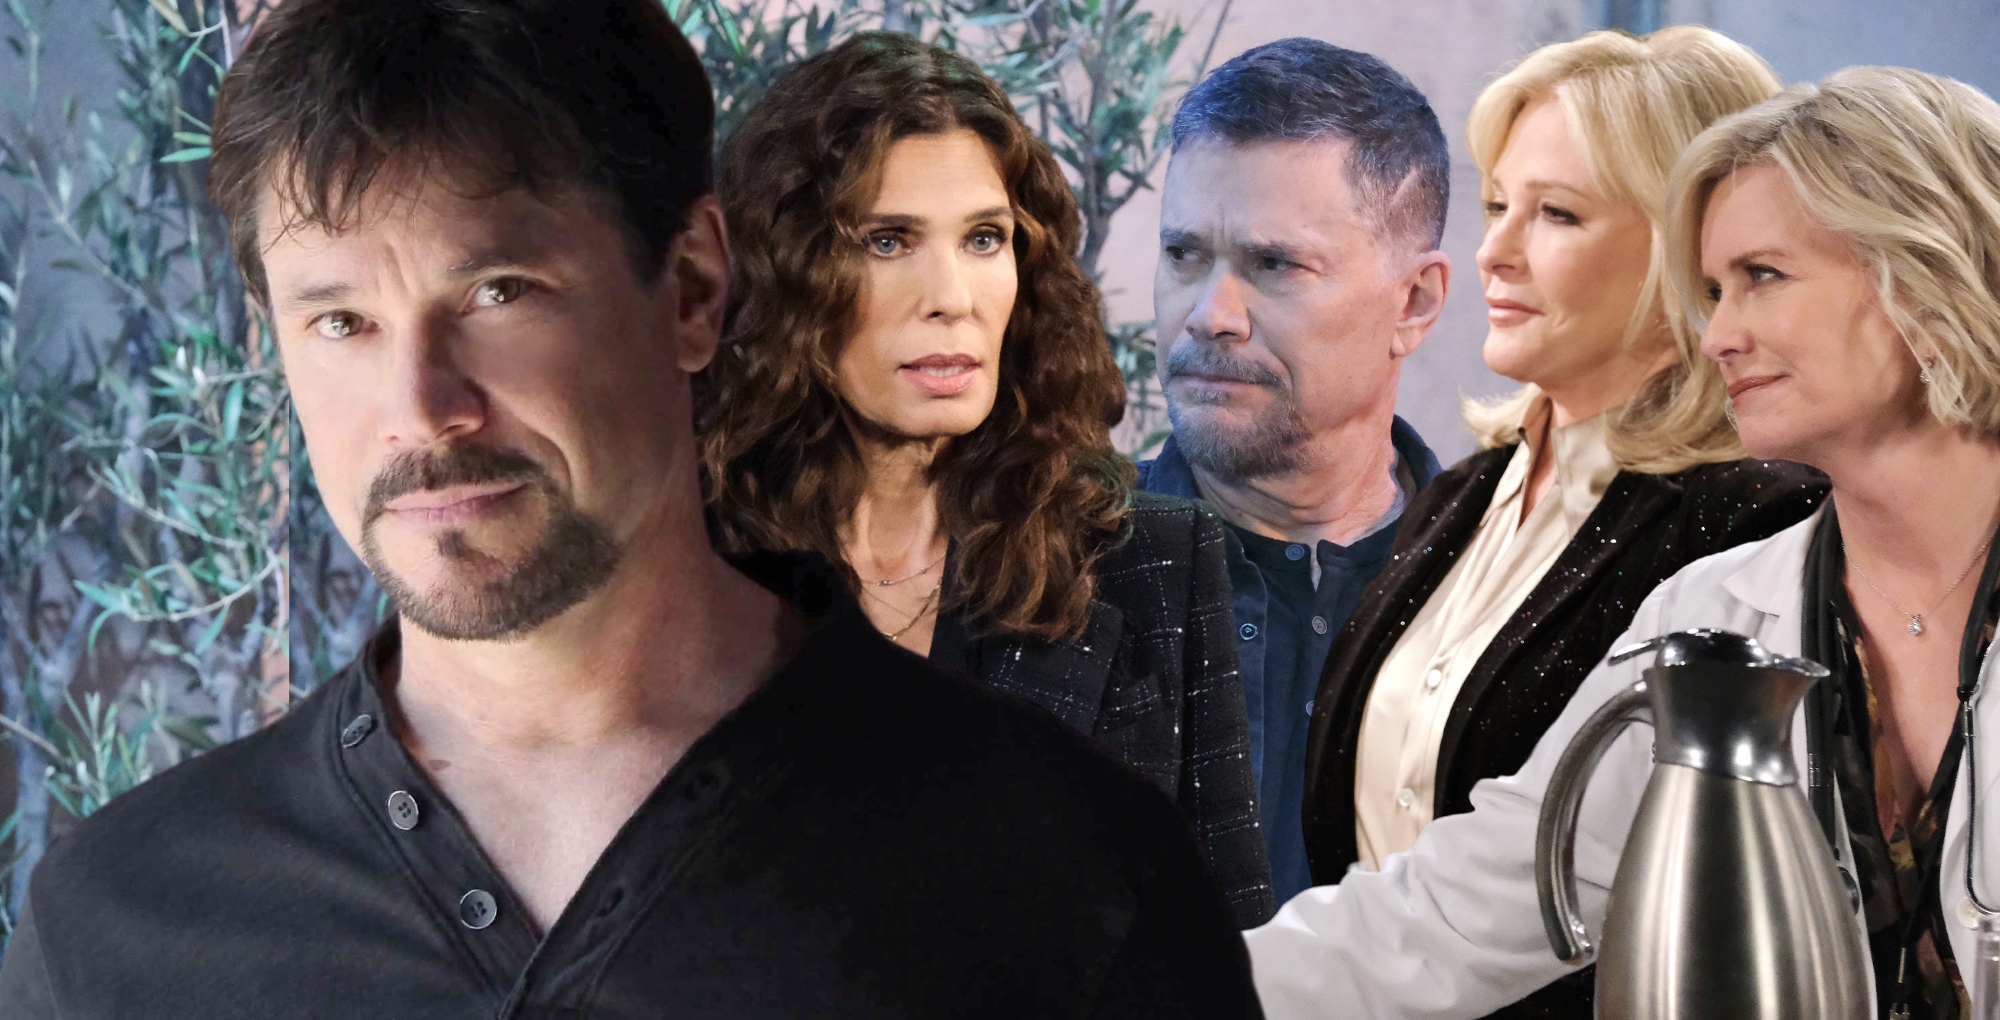 peter reckell recalls bo's life with hope, marlena, and kayla.